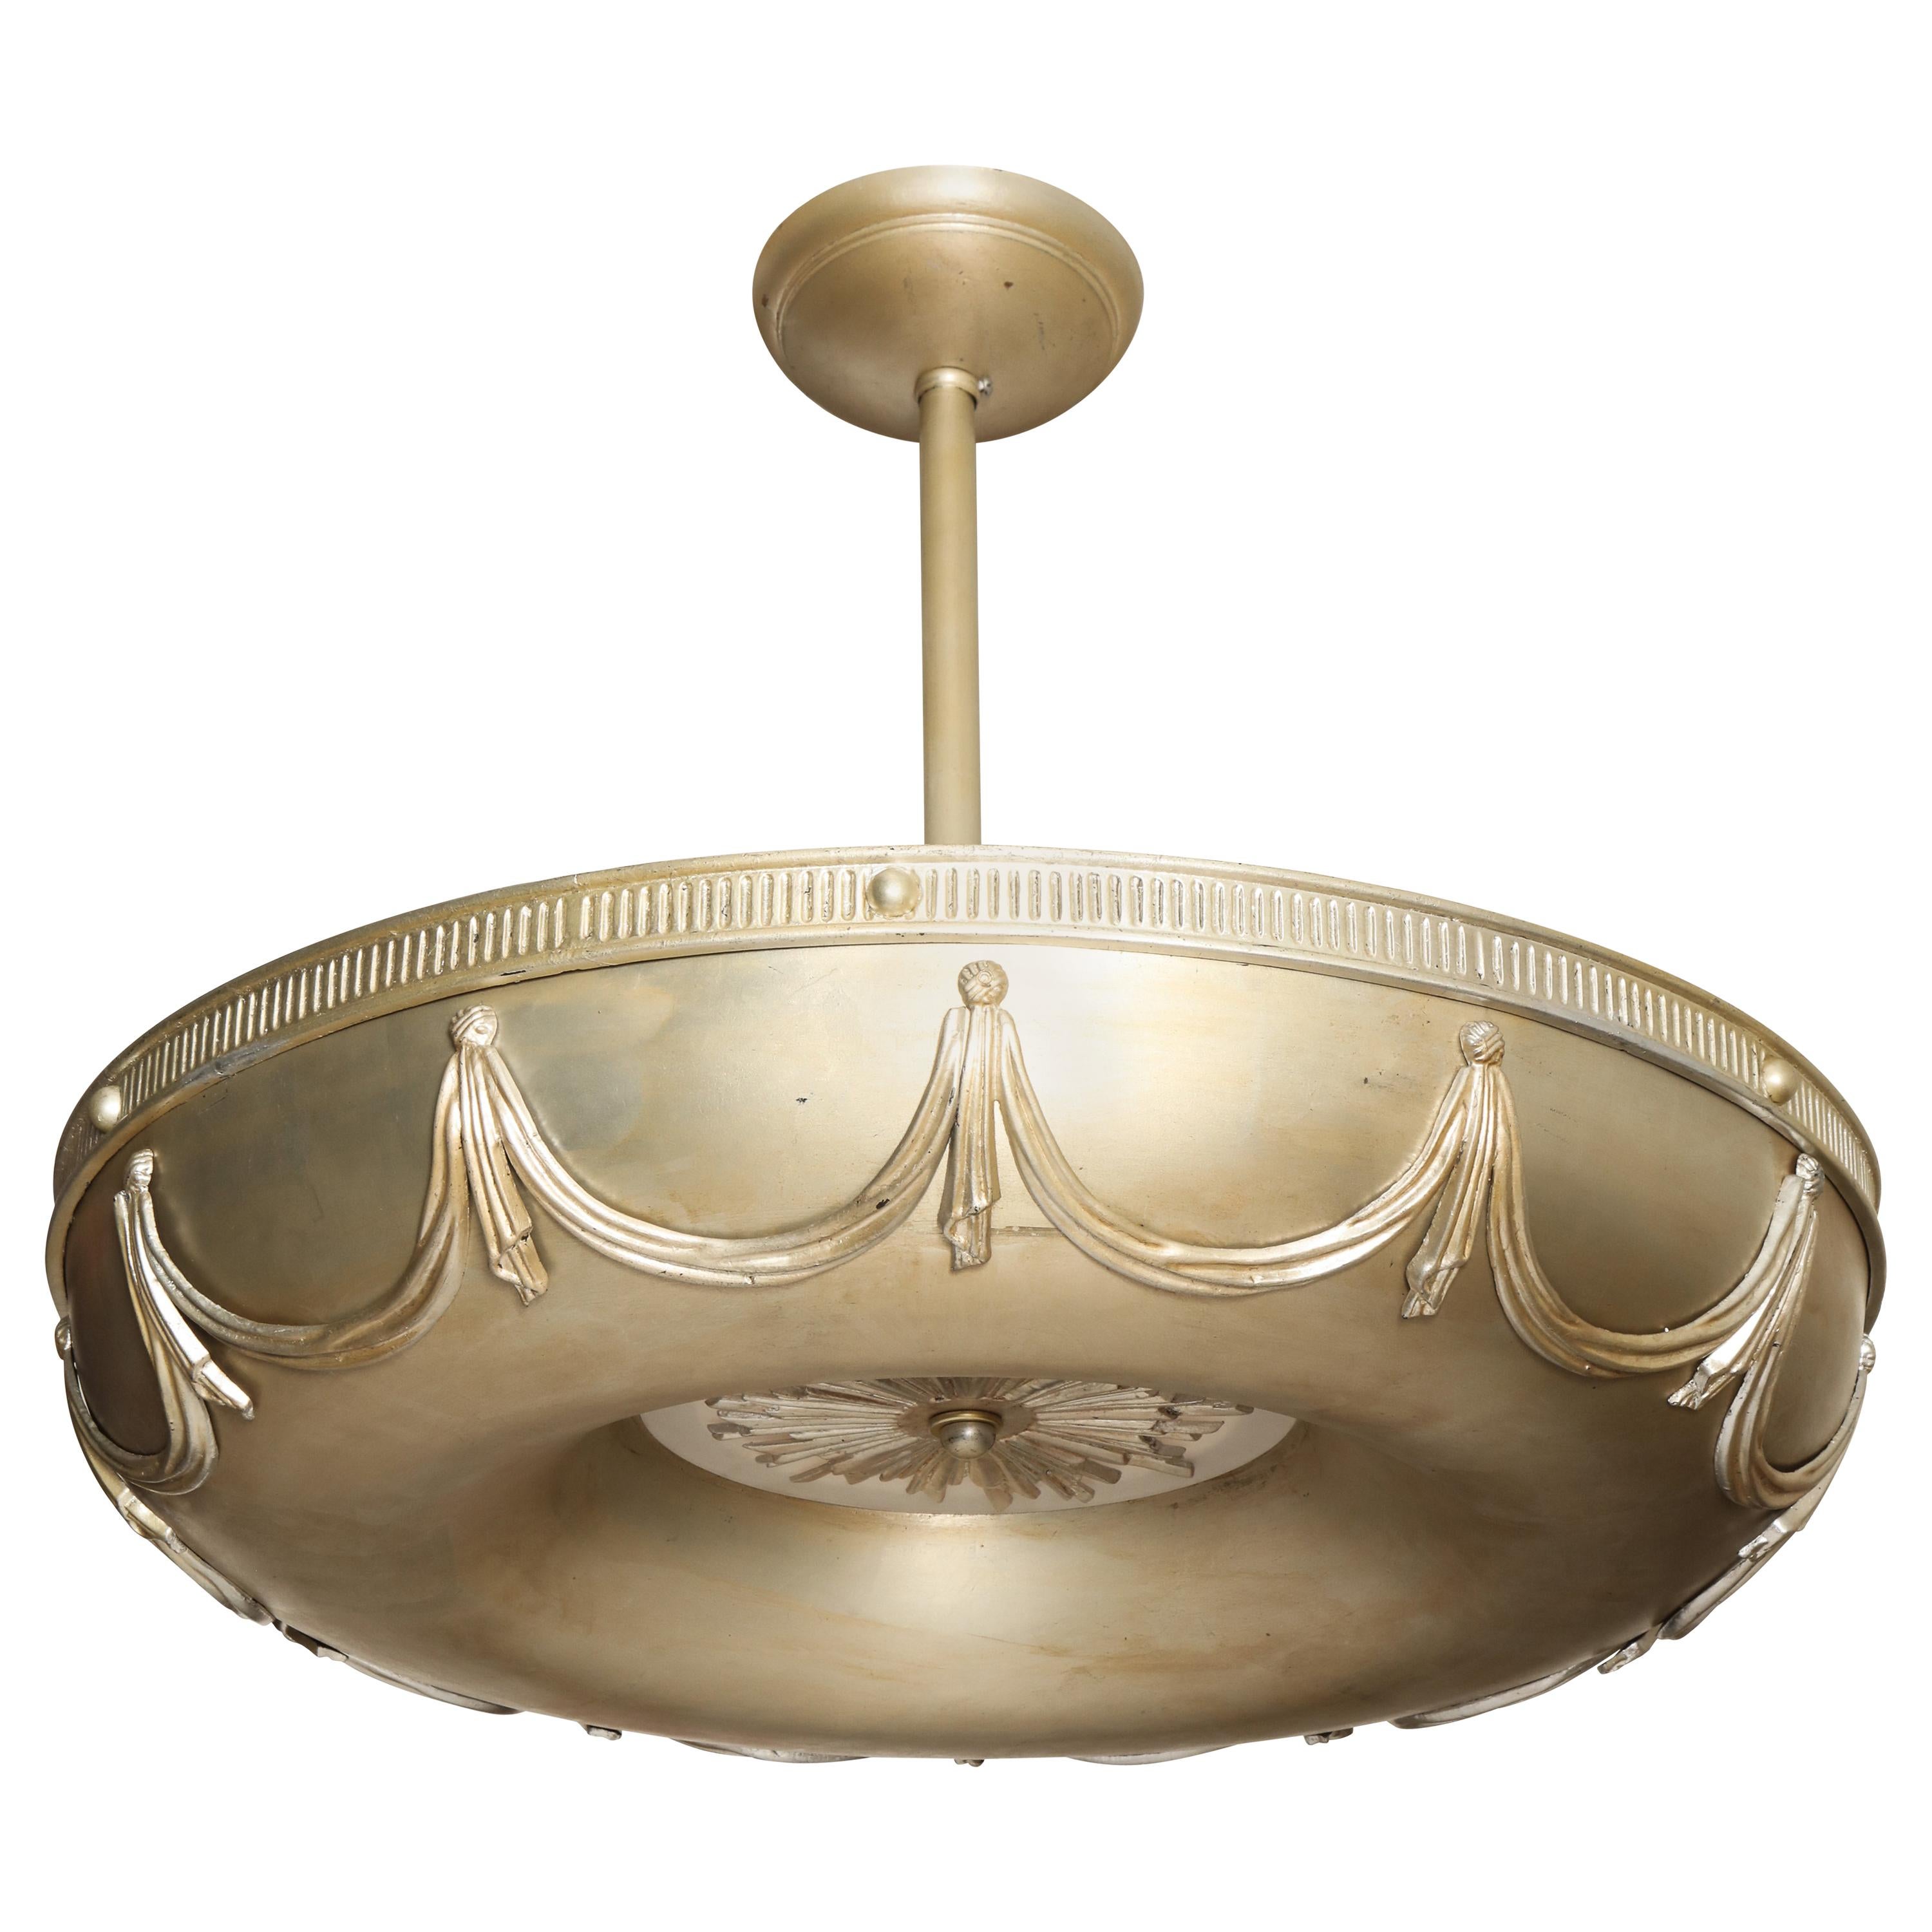 A pair of antiqued silver-leaf Art Deco, inspired chandeliers, with torus shaped frames and swag motifs. Each chandelier features a cast starburst shaped element on the underside with a piece of round frosted circular glass. Seven sockets under the